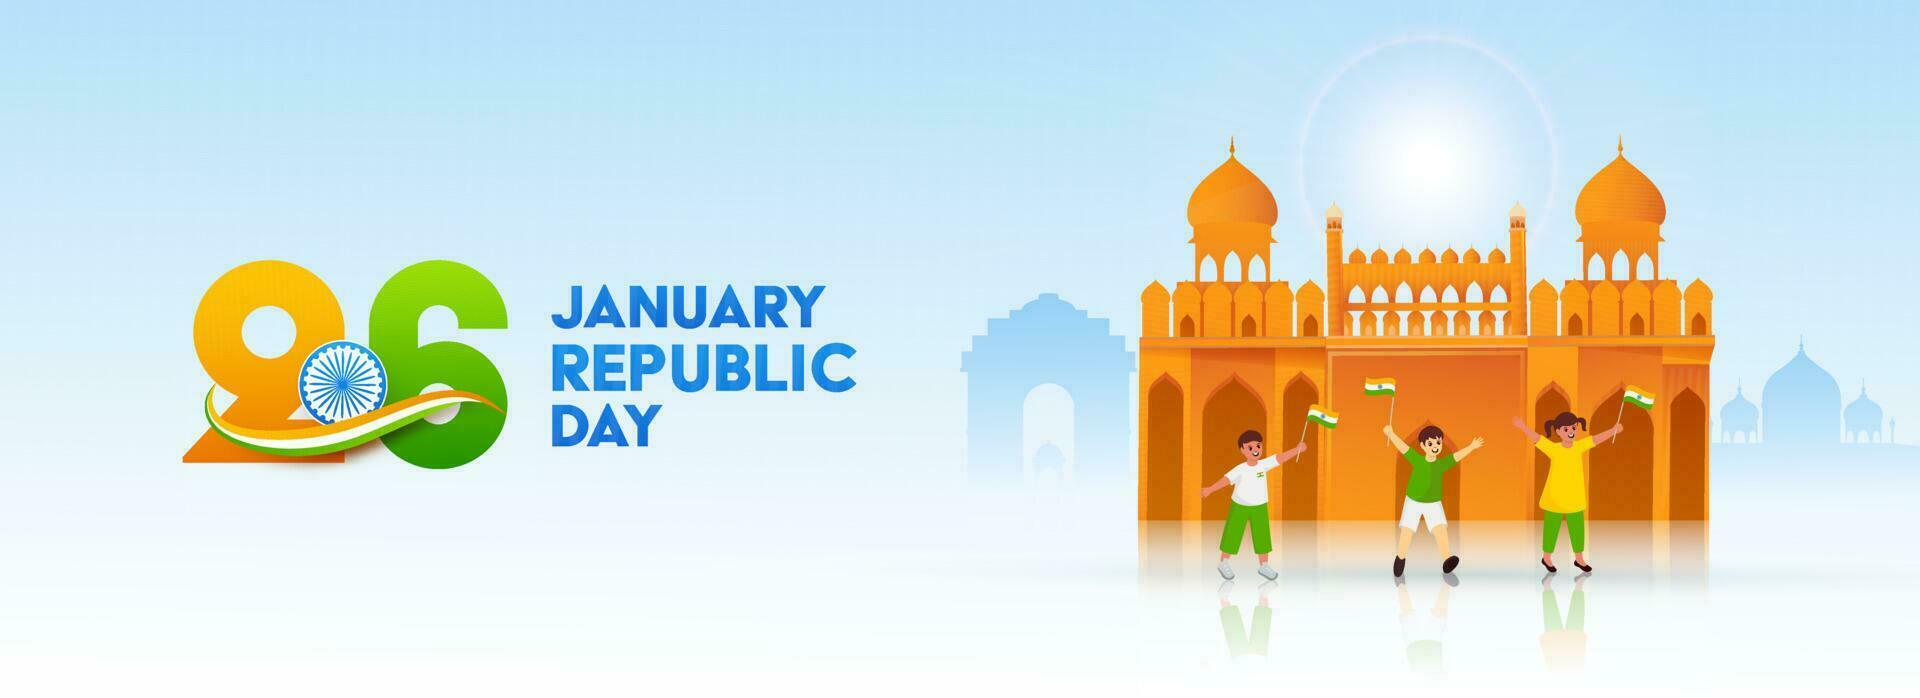 26th January, Republic Day Font With Cheerful Kids Holding National Flags, India Famous Monuments On Blue And White Background. vector